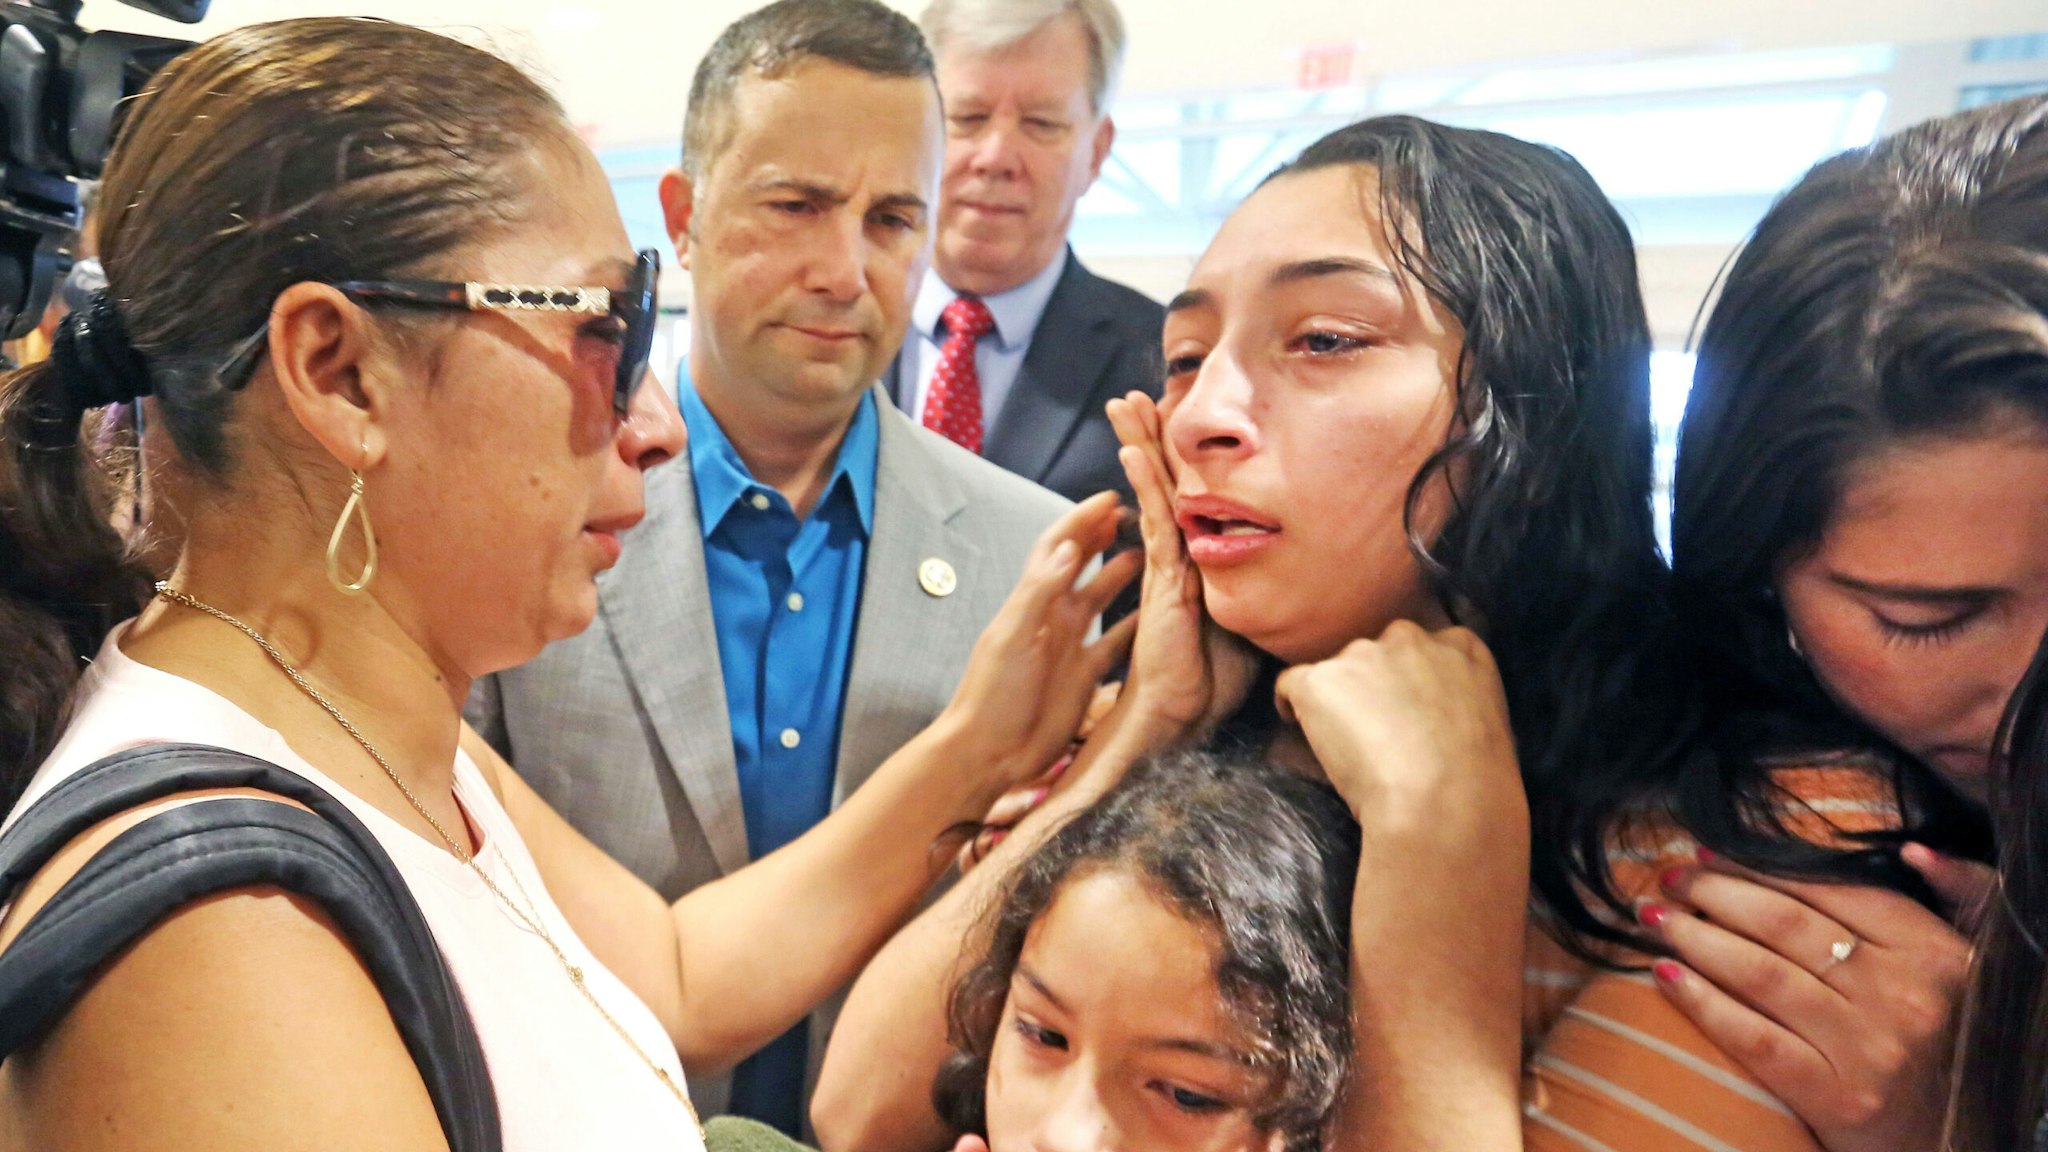 Alejandra Juarez, 38, left, has an emotional goodbye on Friday, Aug. 3, 2018, with her children, Pamela,16, Estela, 8, and Katie Aragon, right, of FWD.US at the Orlando International Airport. U.S Rep Darren Soto, second from left, looks on. Juarez has run out of options to keep her Davenport, Fla., family together and will be deported as U.S. Immigration and Customs Enforcement officials denied the Polk County Marine veteran's wife stay of removal request last week.